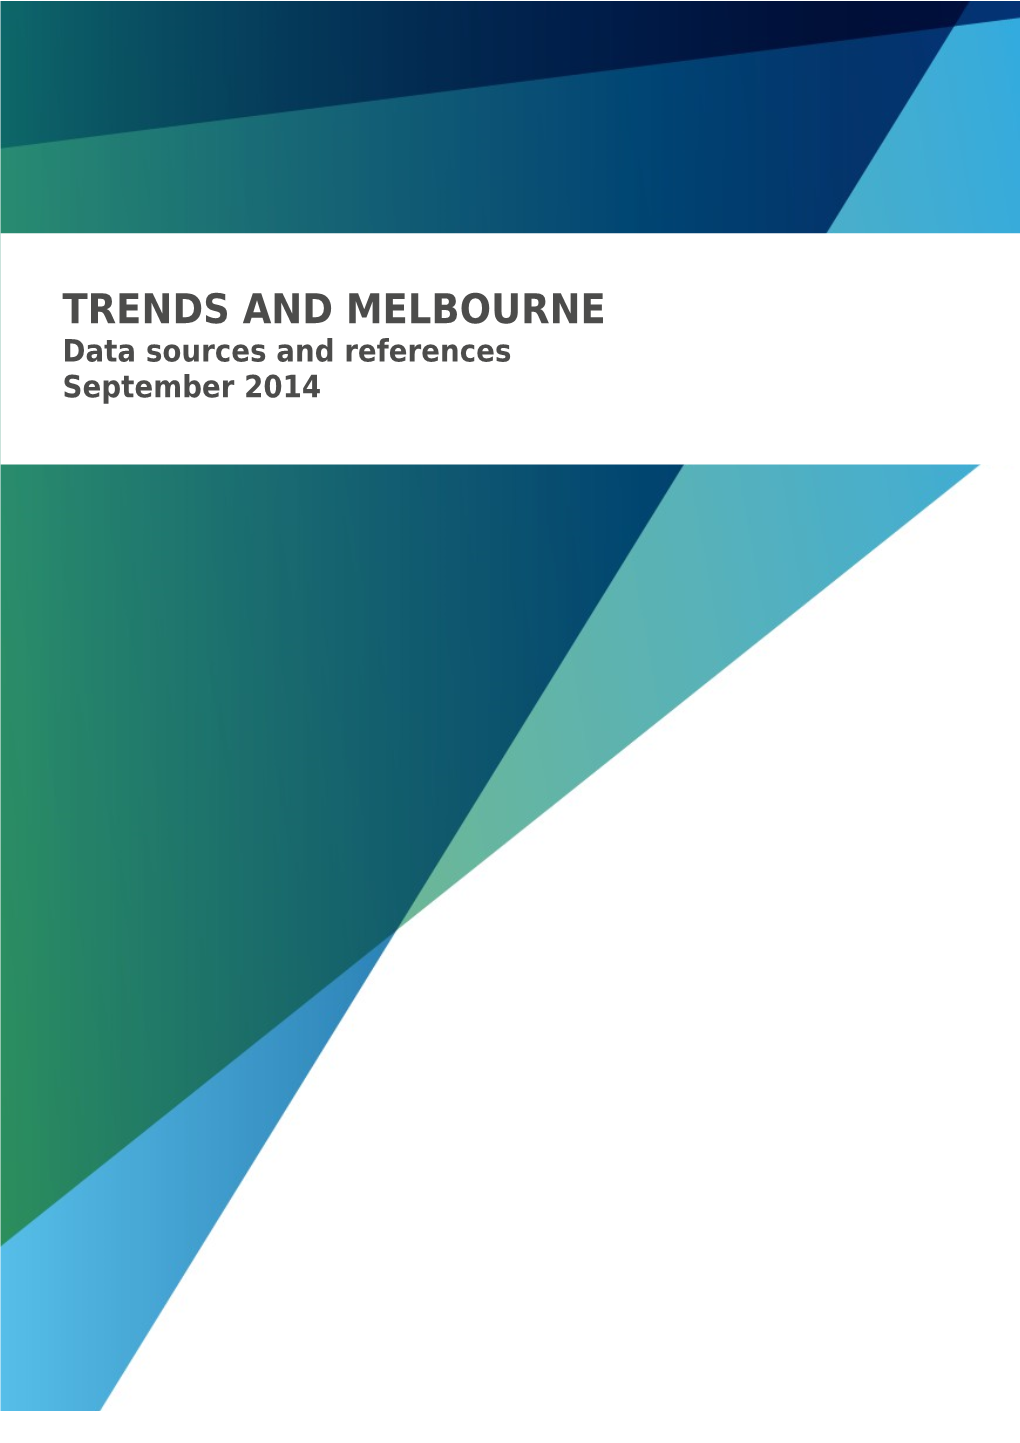 Trends and Melbourne Report 2014 Data Sources